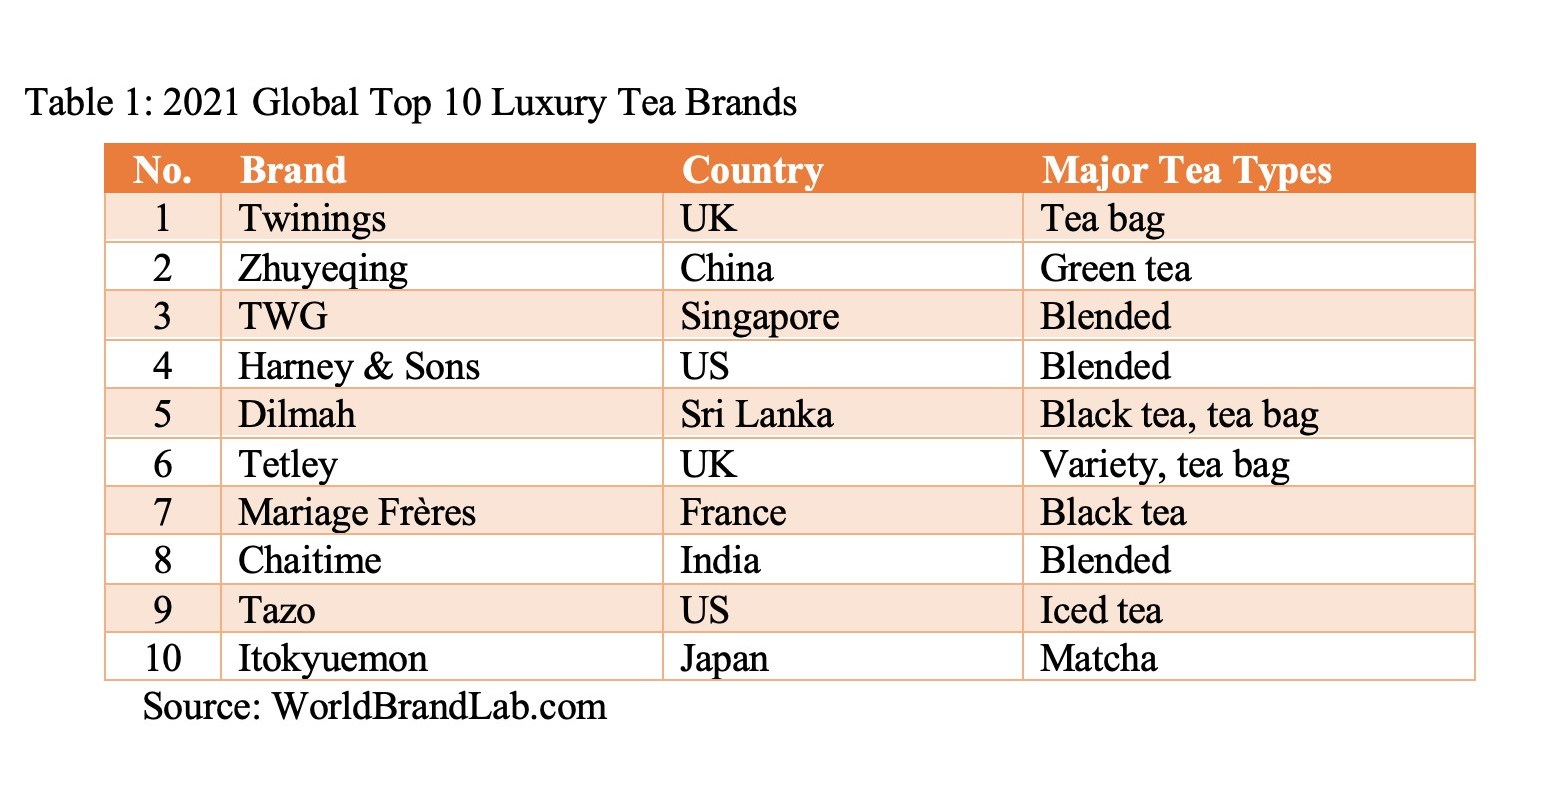 World Brand Lab Releases Its '2021 Global Top 10 Luxury Tea Brands'